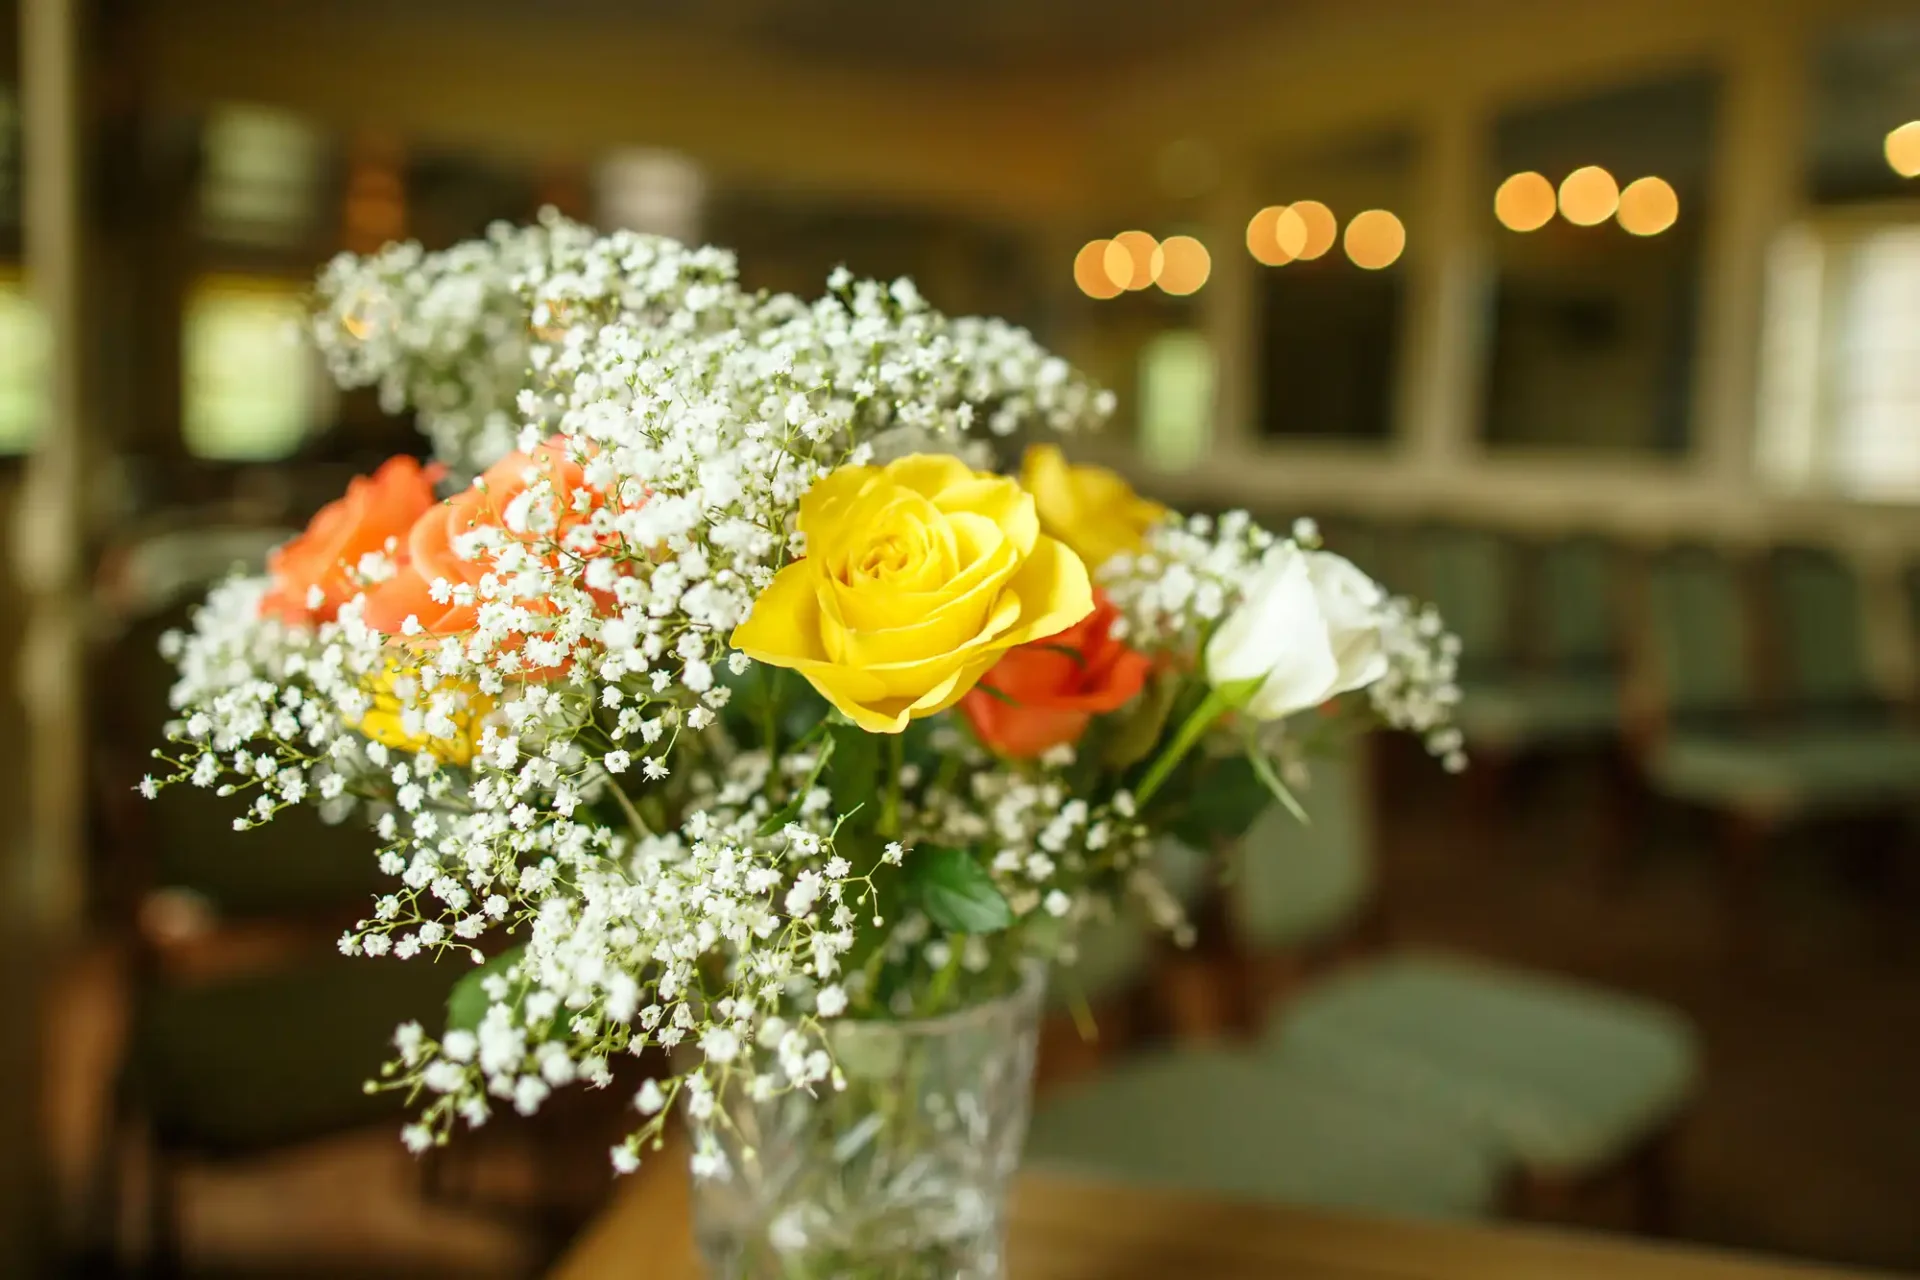 A vibrant bouquet of roses with mixed colors complemented by baby's breath, displayed in a vase with a softly blurred restaurant background.